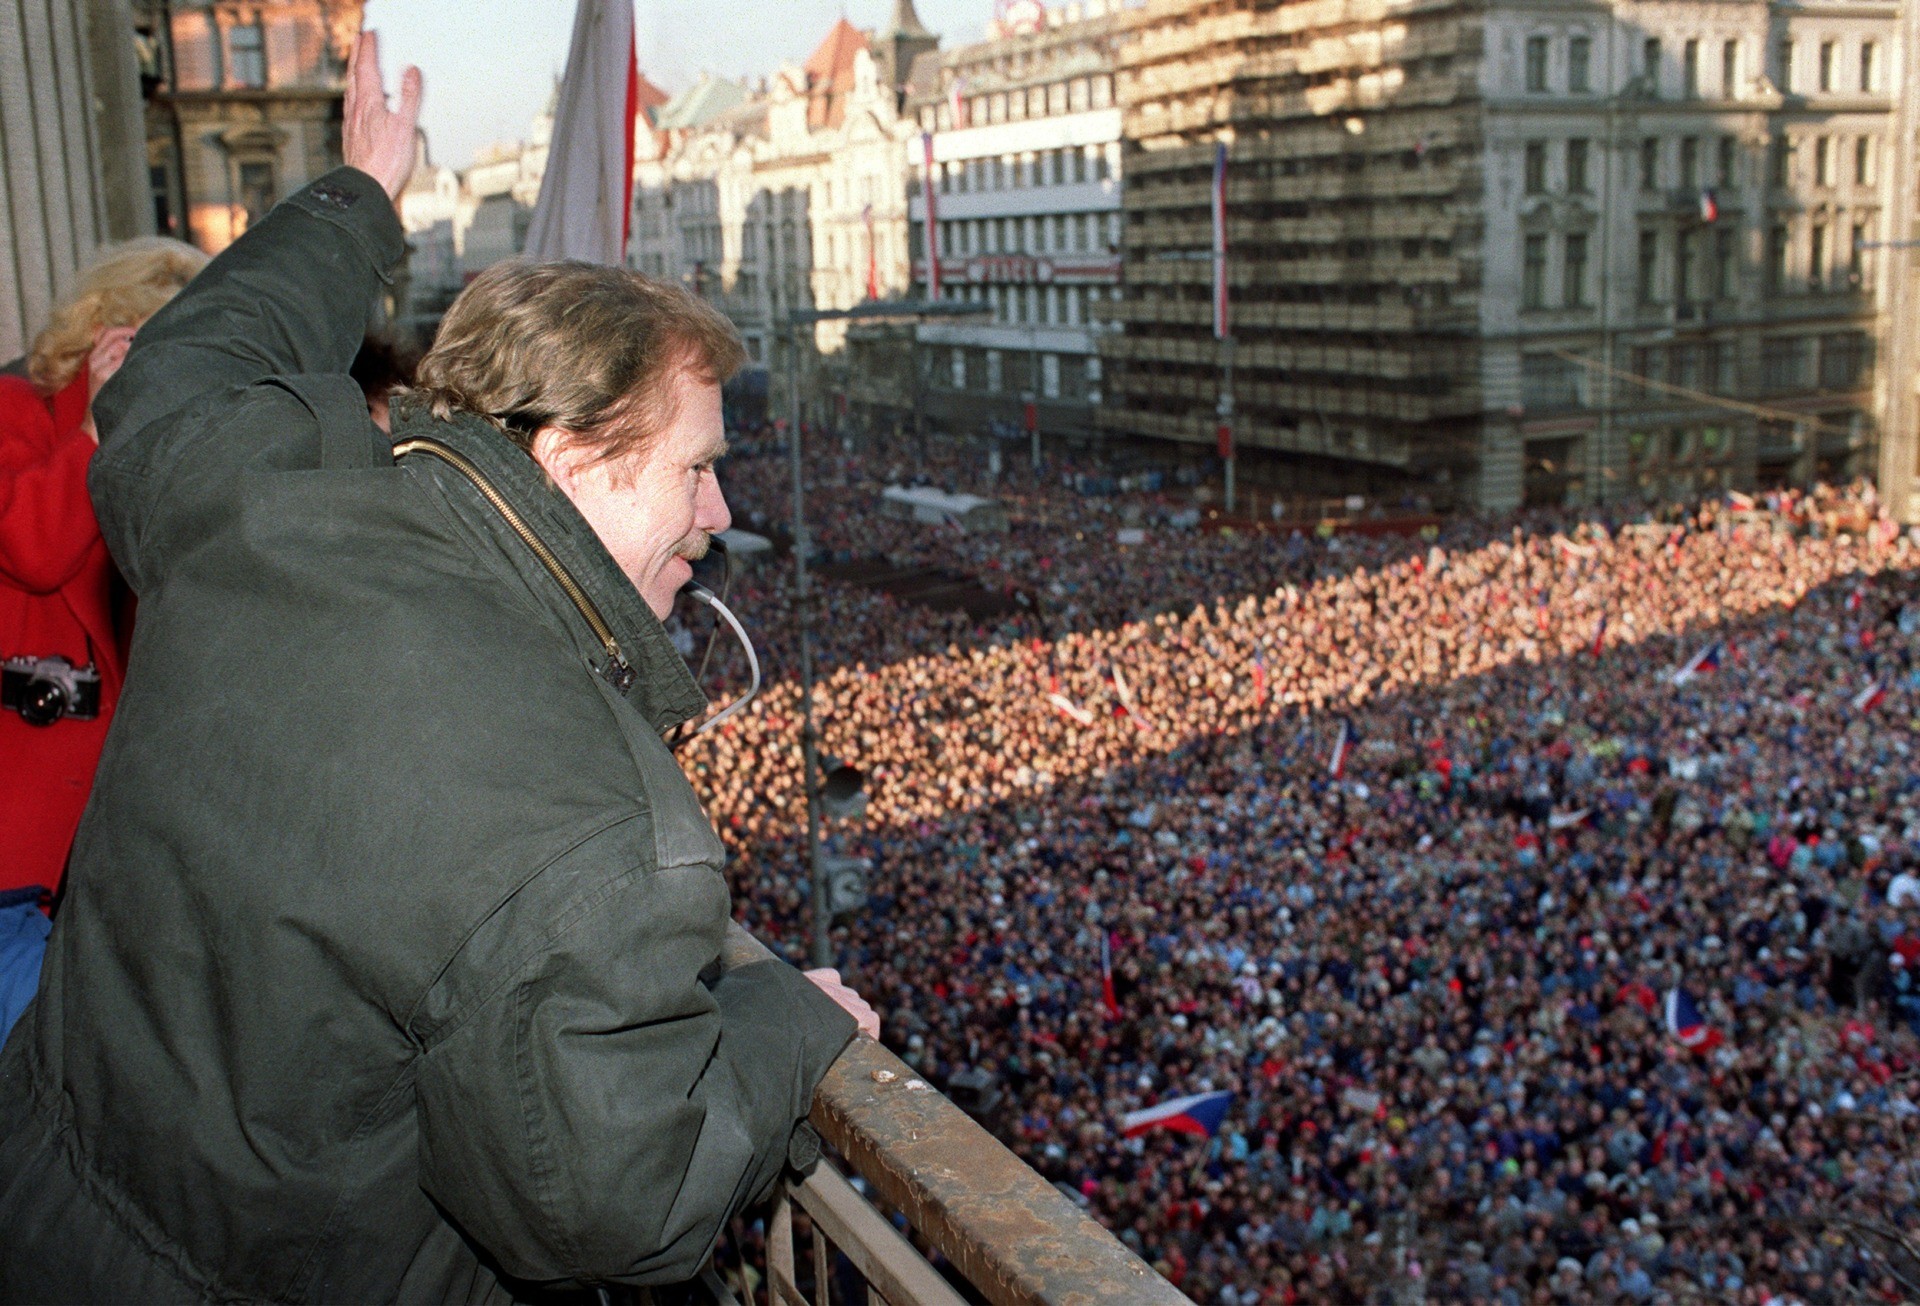 Vaclav Havel, a dissident playwright and leading member of the Czechoslovak opposition Civic Forum, who drafted large parts of Charter 77, the declaration which helped attract international attention to the civil rights abuses in Czechoslovakia, waves 10 December 1989 to the crowd of thousands of demonstrators gathered on Prague's Wenceslas Square, celebrating the communist capitulation and nomination of the new government formed by Marian Calfa from Slovak dissident movement the Public Against Violence. At the end of 1989, Havel was elected first president of the then Czechoslovakia when the state-communist system crumbled in the Velvet Revolution. LUBOMIR KOTEK/AFP via Getty Images